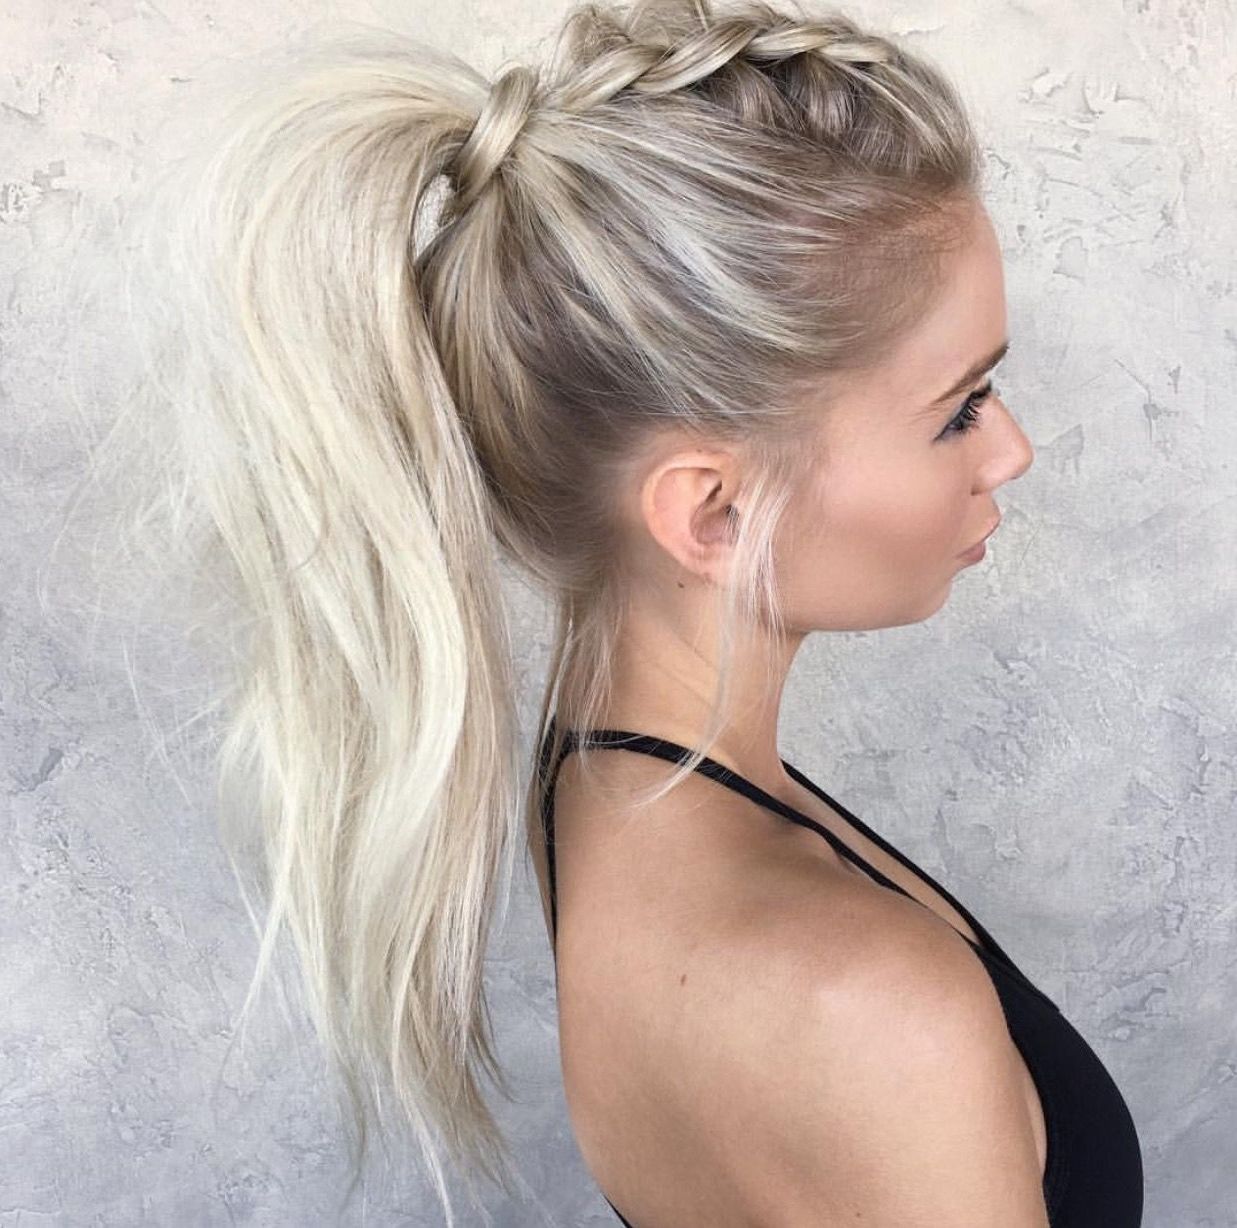 Braided High Ponytail With Barely There Curl Hairstyle (View 3 of 20)